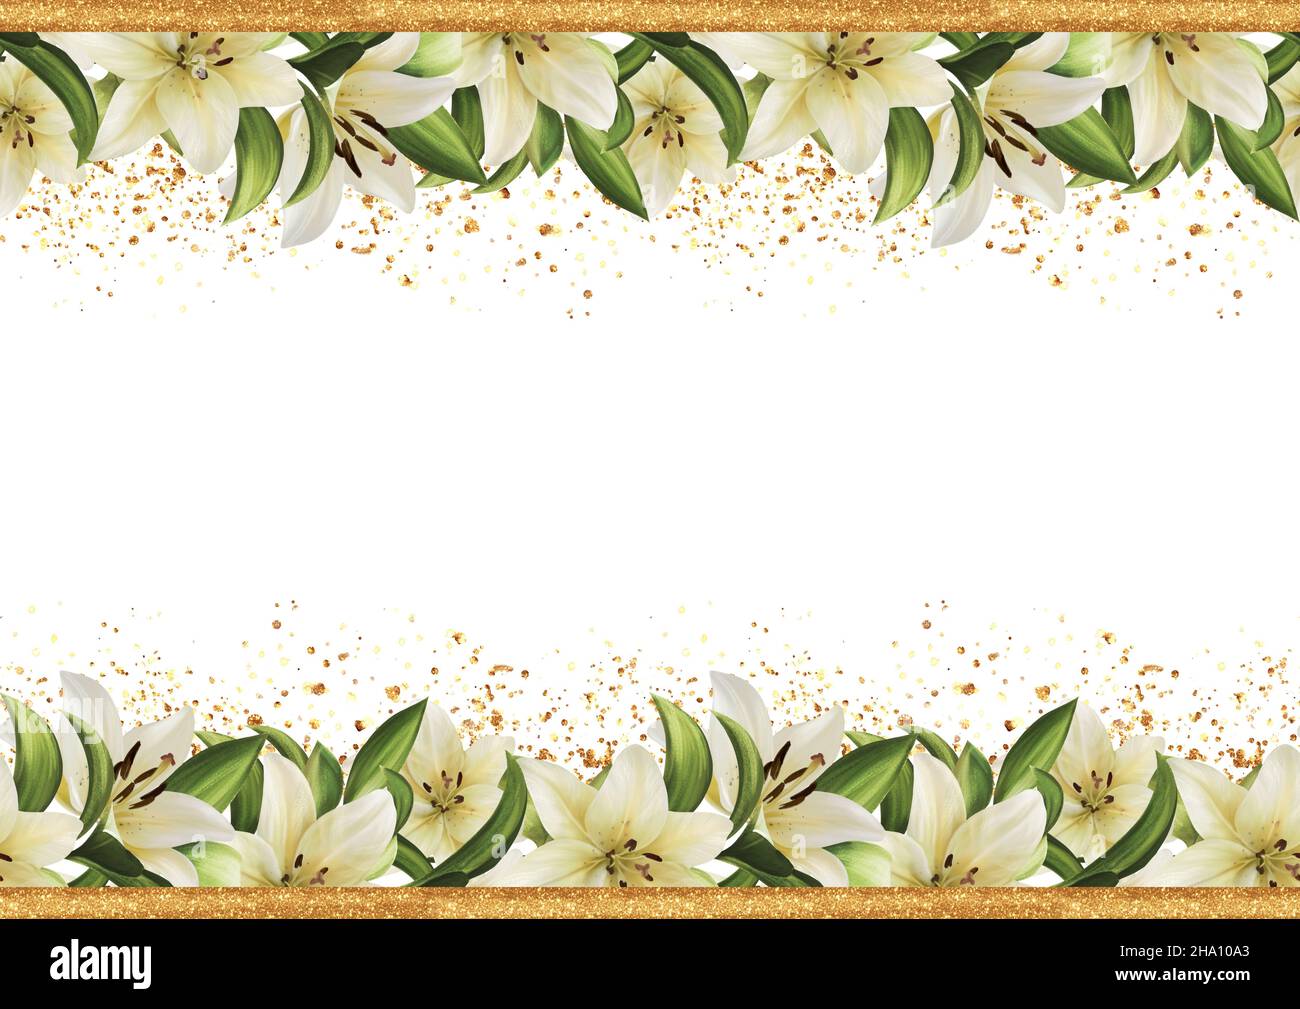 Floral border. White lily flowers seamless pattern. Stock Photo